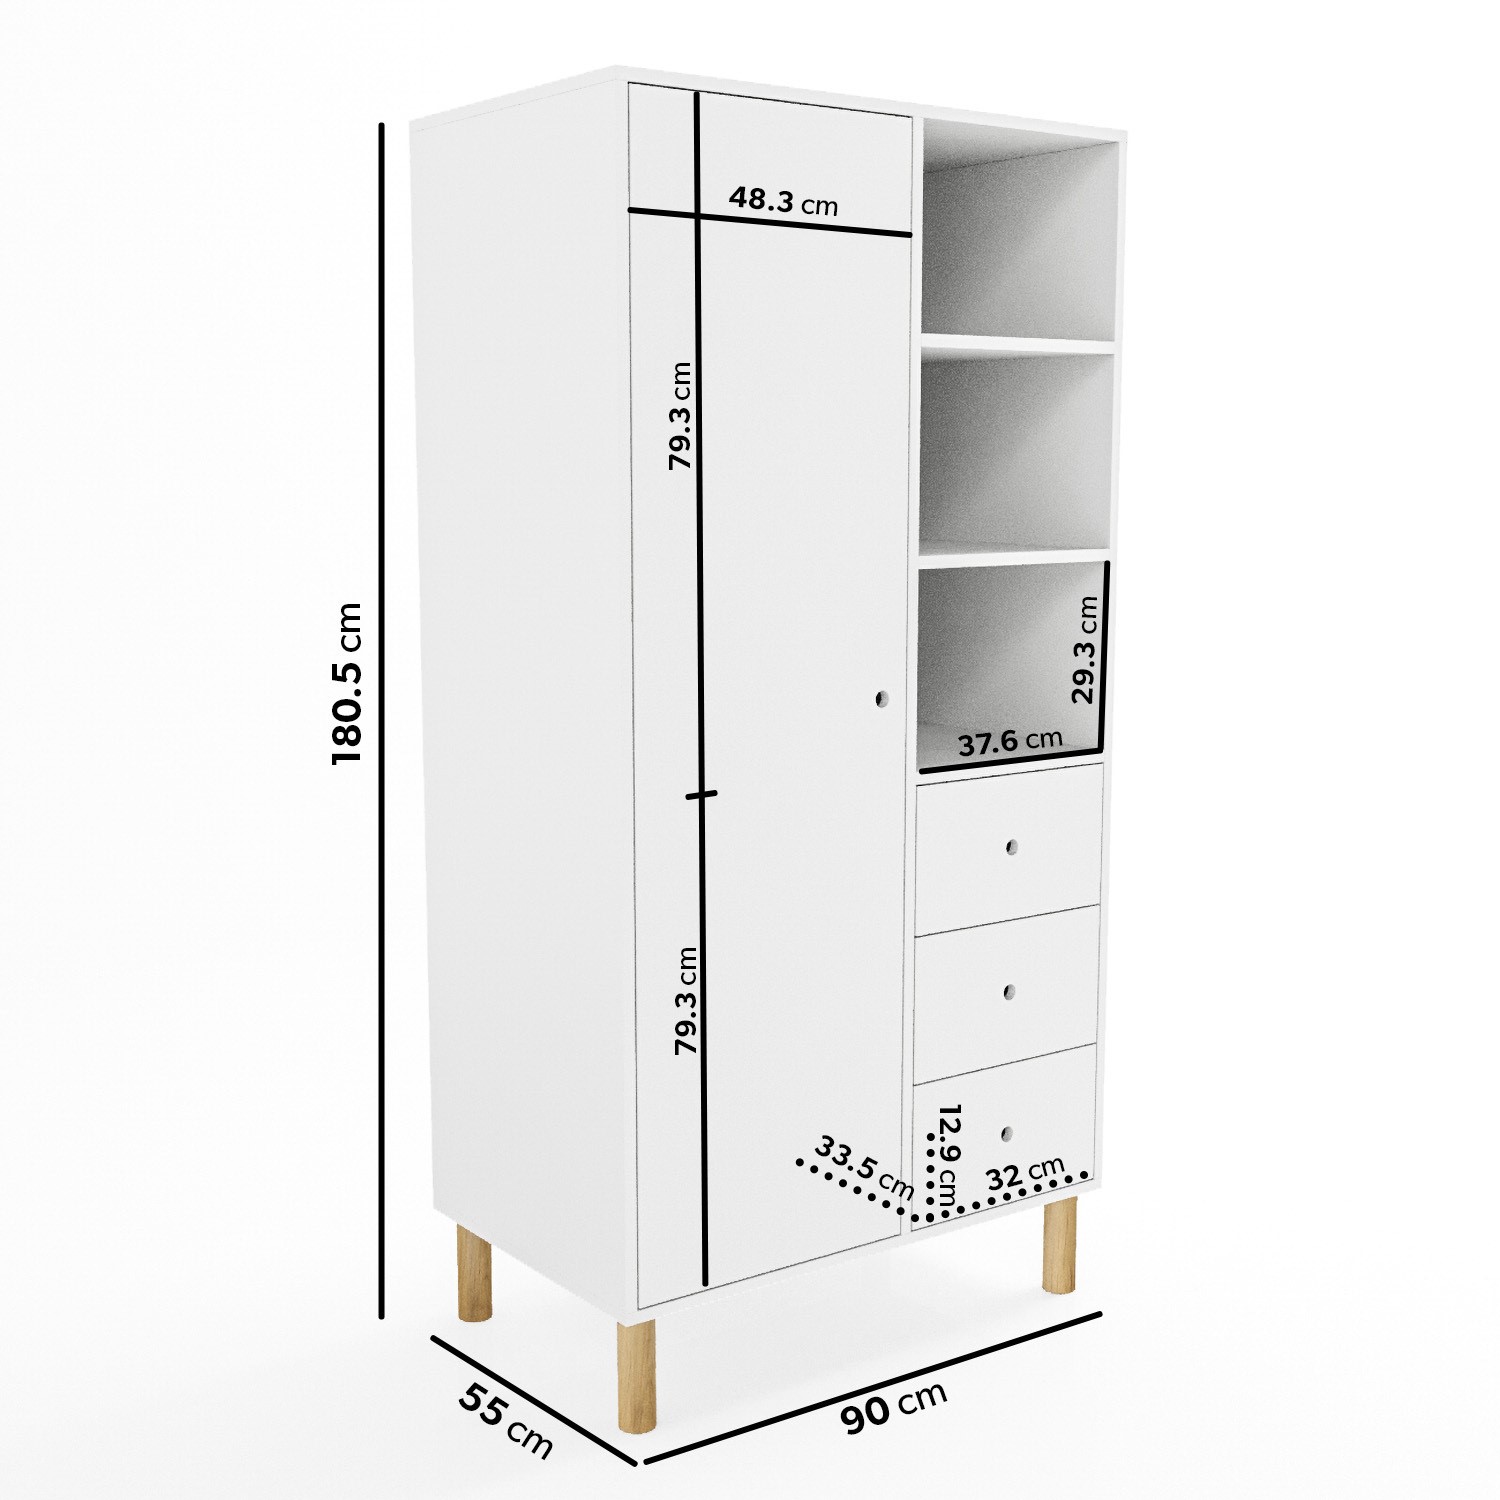 Read more about Kids white scandi wardrobe with drawers and shelves juni